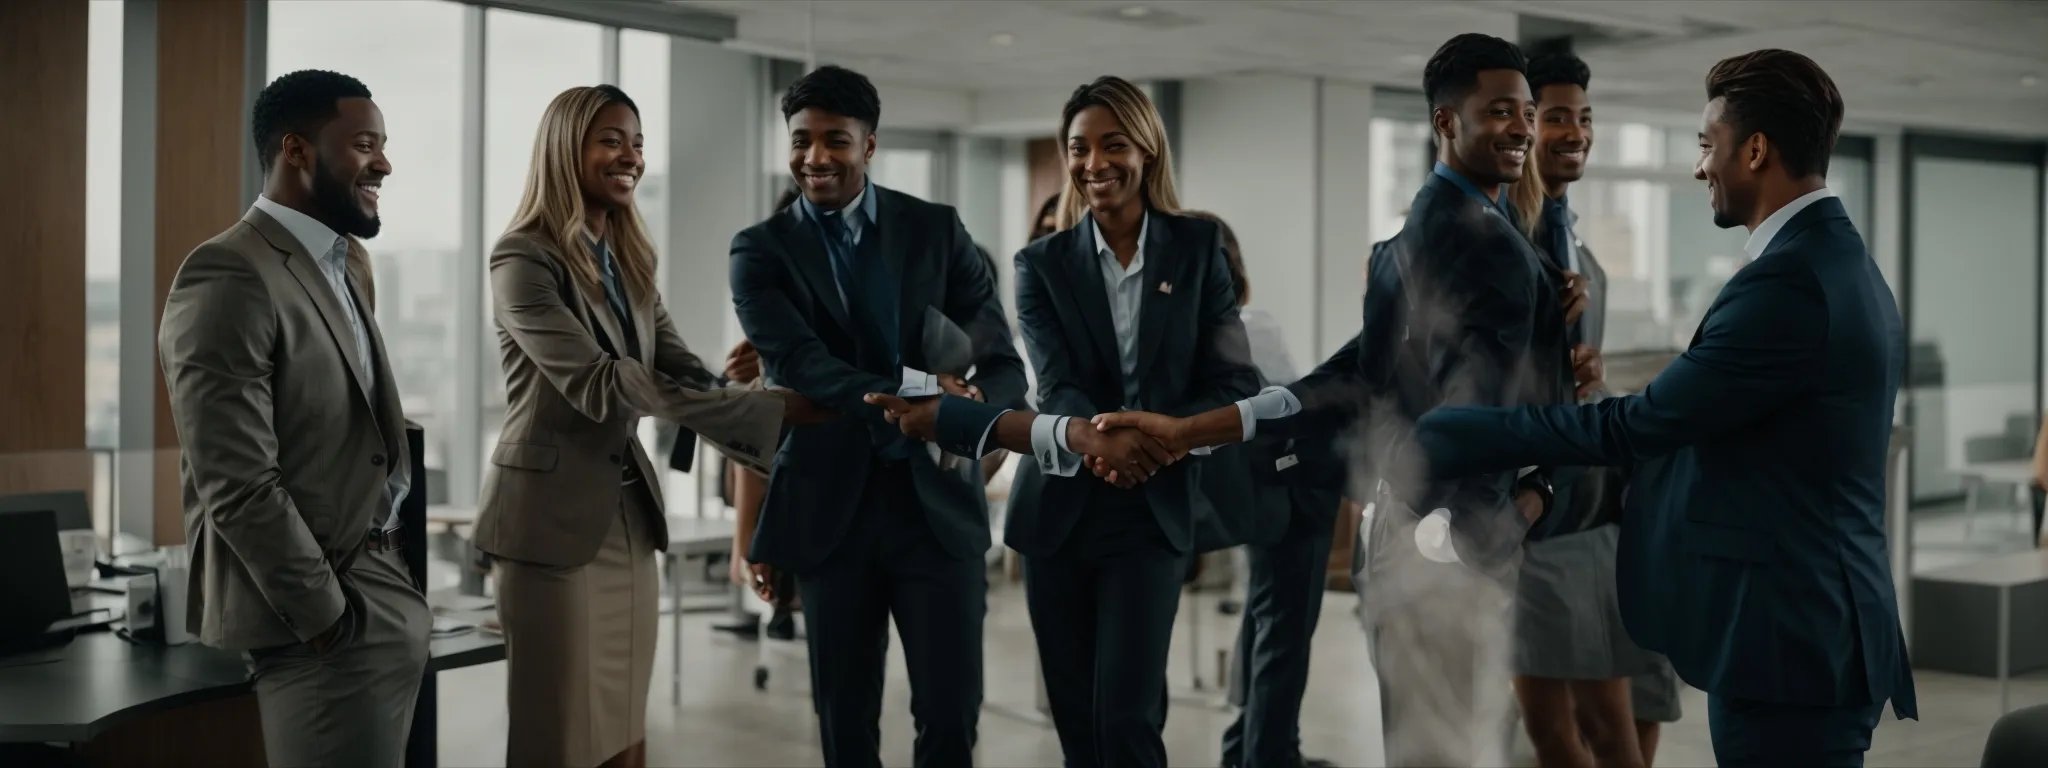 a group of smiling professionals shaking hands in a modern office, symbolizing partnership and trust.